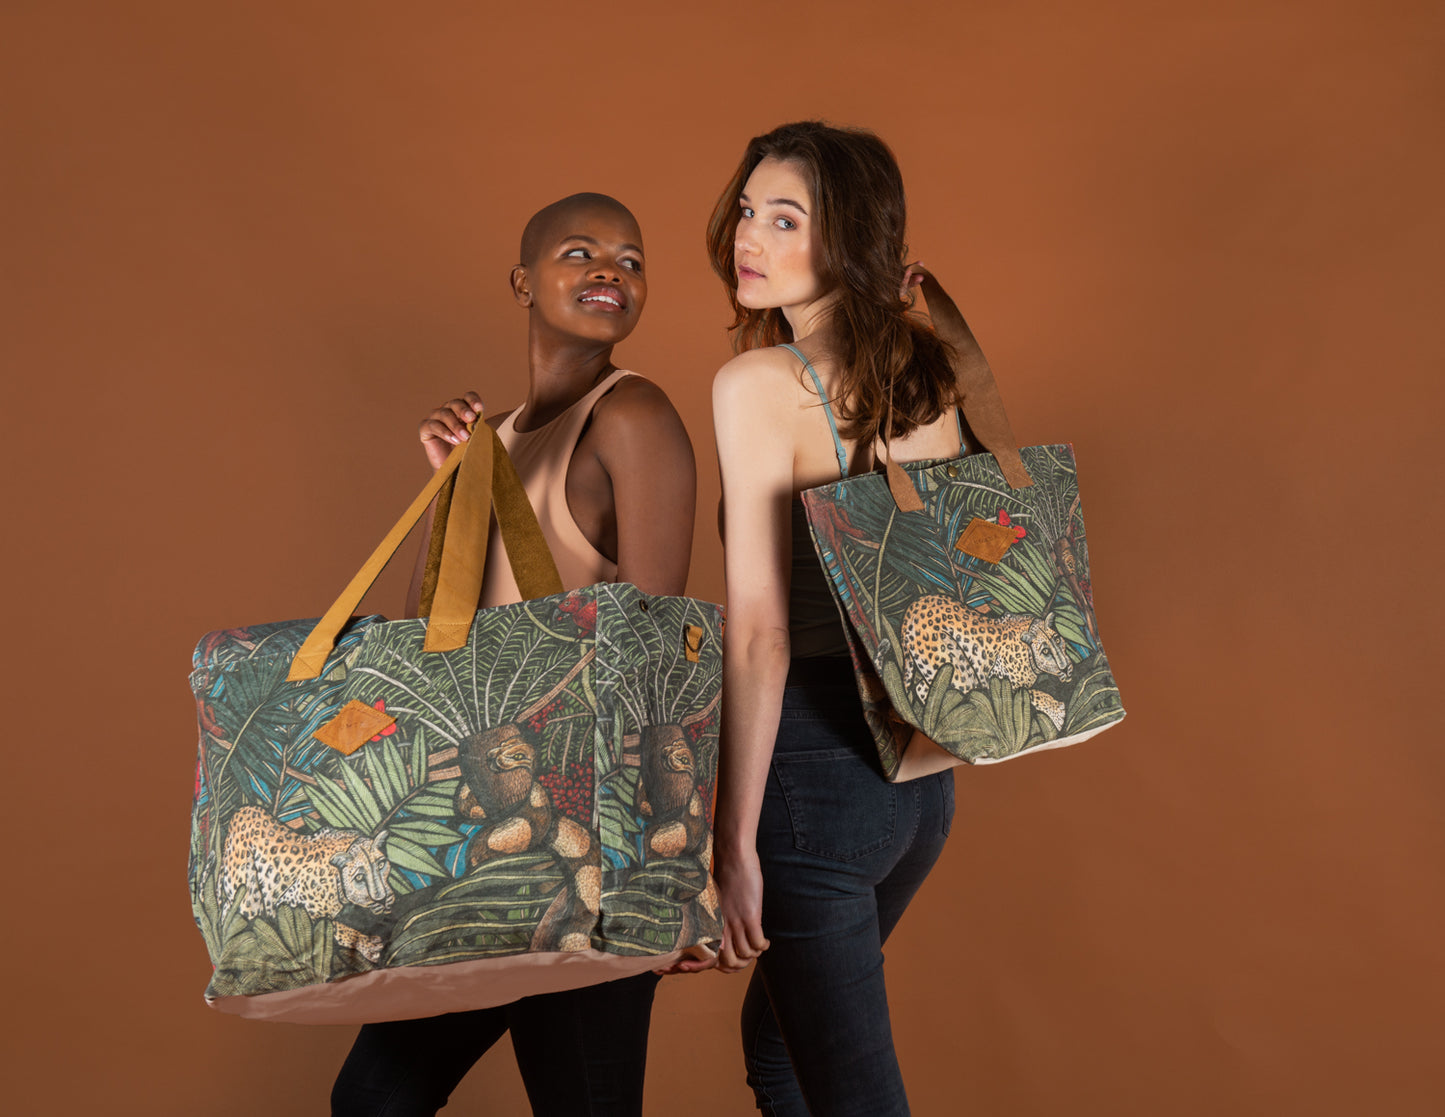 The India Bag by KL Studios